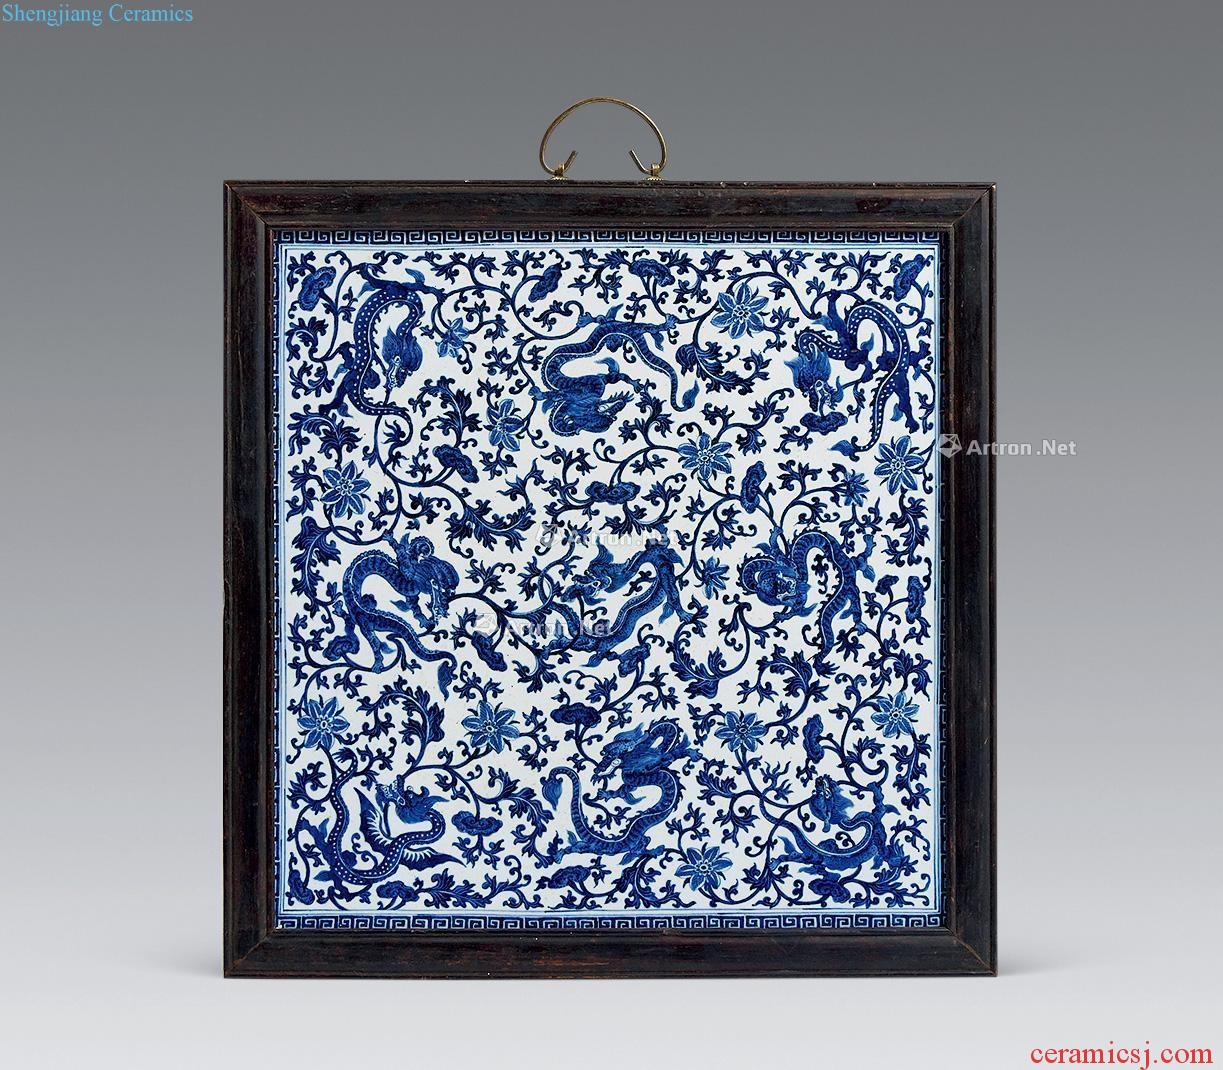 In the qing dynasty Blue and white grain porcelain plate hanging panel, Kowloon